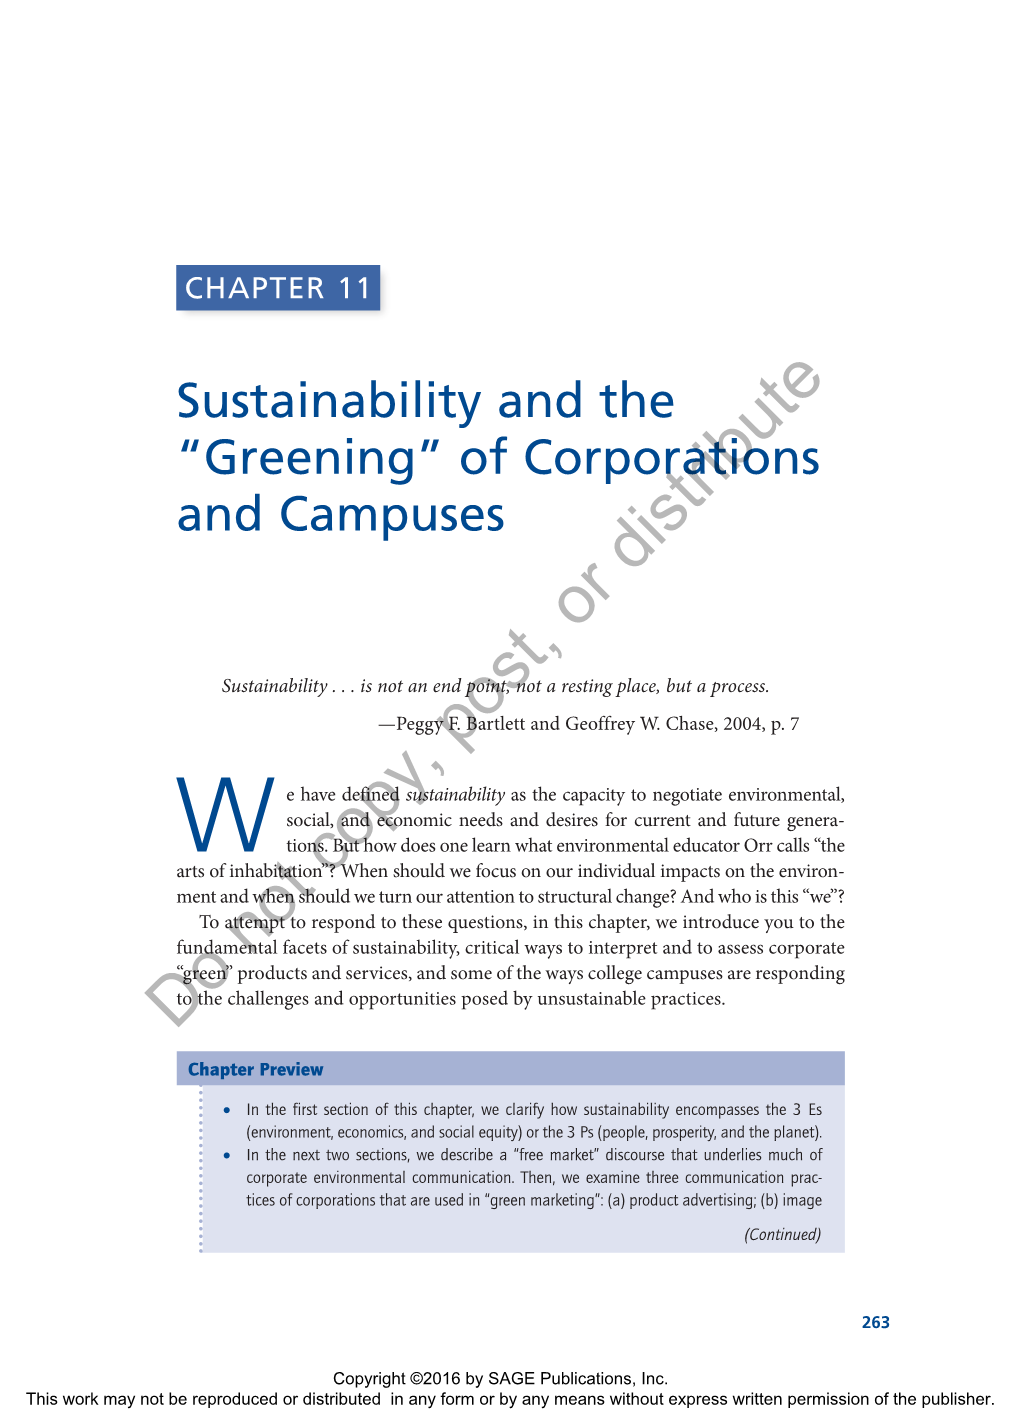 Sustainability and the “Greening” of Corporations and Campuses Distribute Or